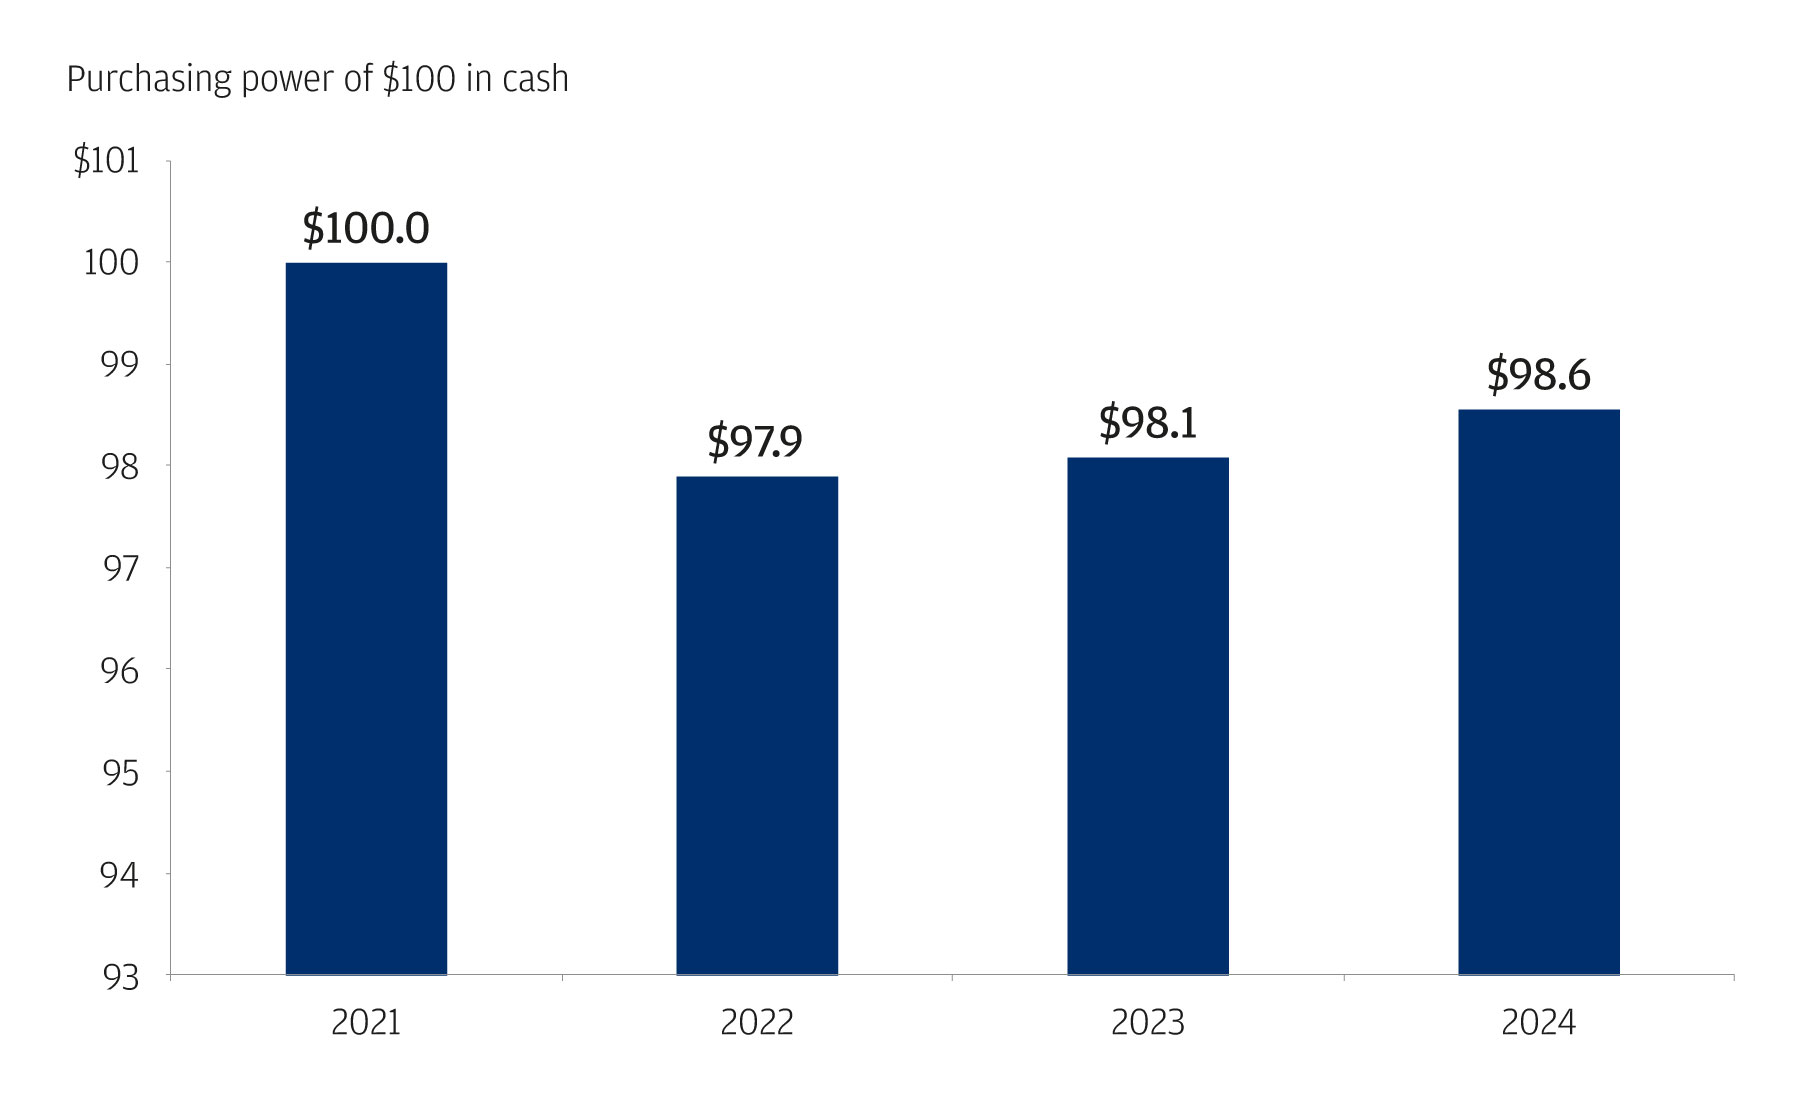 A bar chart shows the expected change in purchasing power of 100 units of cash in dollars, starting in 2021 through 2024. By 2024, the purchasing power of the original 100 units of cash is projected to decline to 98.6 dollars.